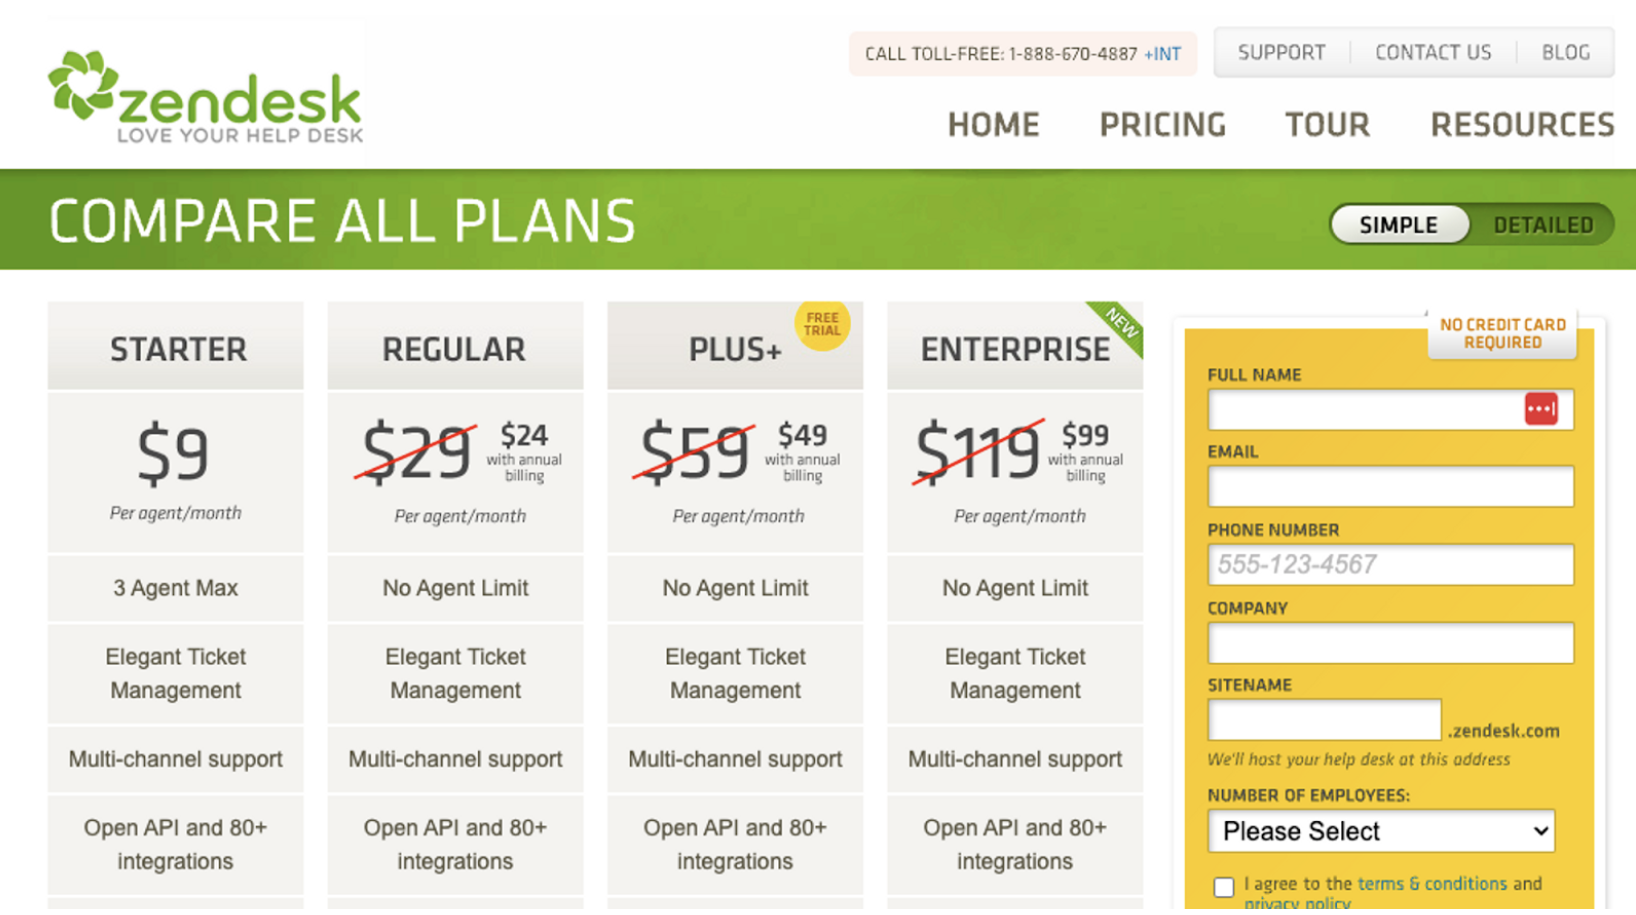 Zendesk&#x20;introduced&#x20;enterprise&#x20;pricing&#x20;in&#x20;2011&#x20;&#x28;4&#x20;pricing&#x20;plans&#x29;